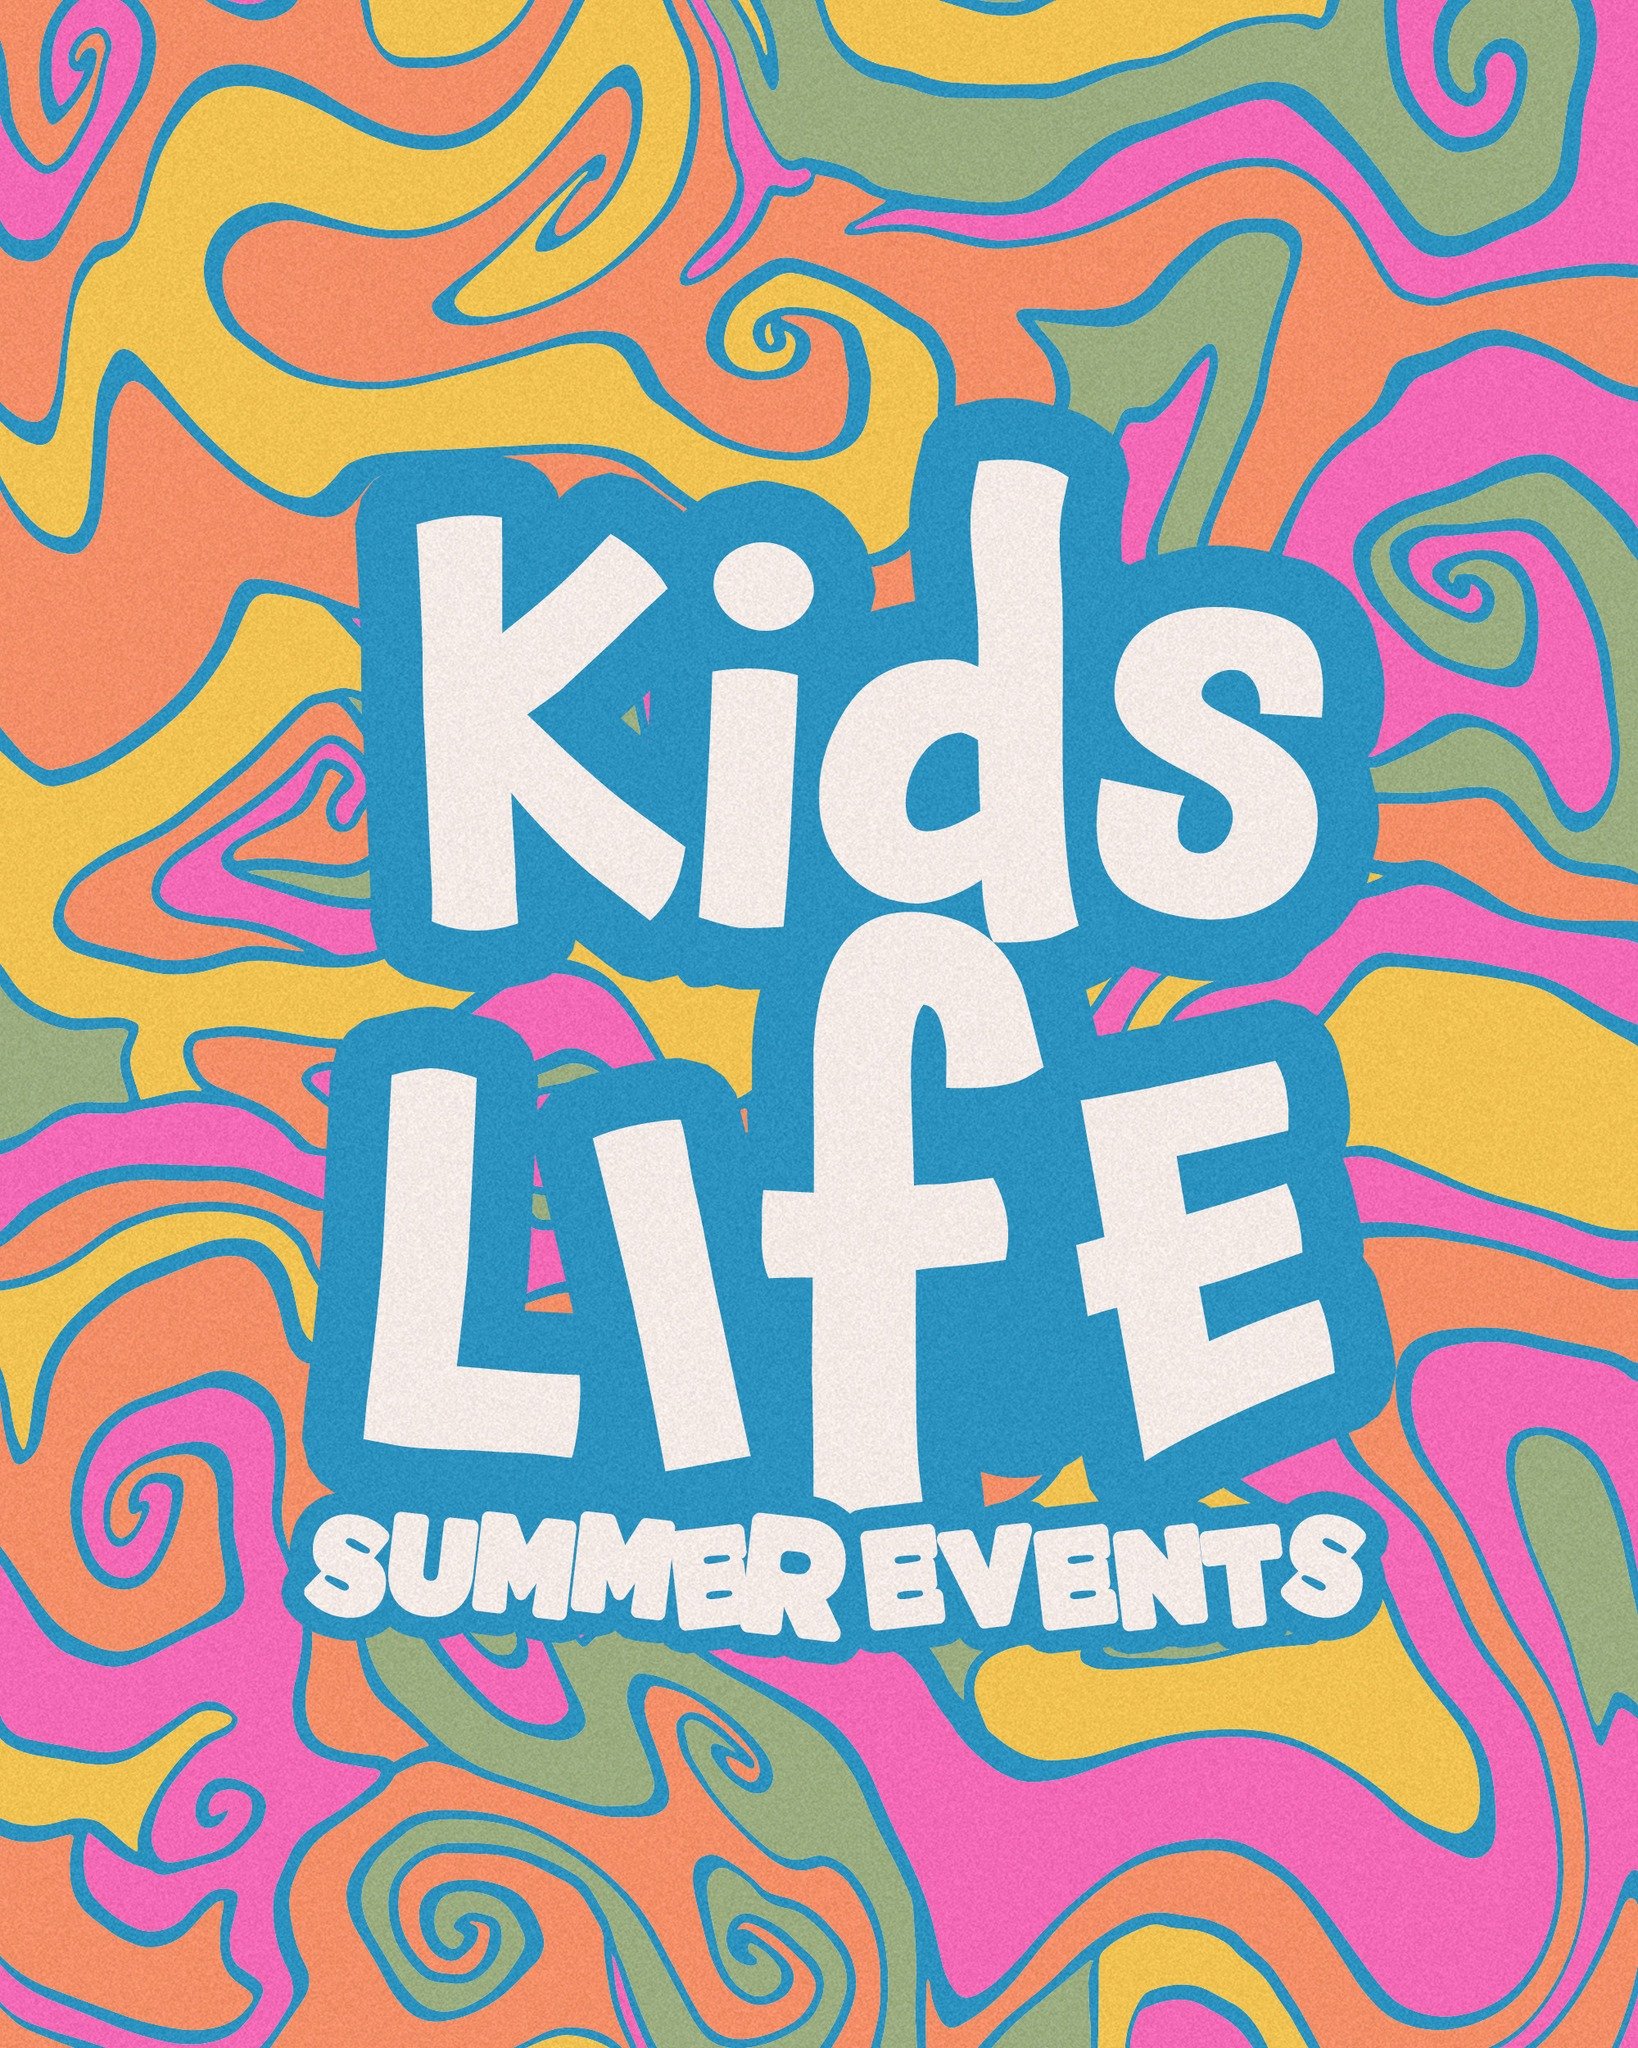 ☀️ KIDS LIFE SUMMER EVENTS ☀️

Are you looking for fun summer activities for your kids?! We have several opportunities for them to get involved! 

🌴 Cookeville Campus Vacation Bible School - June 10-13
🌴 Baxter, Livingston, &amp; Sparta Campus Vaca